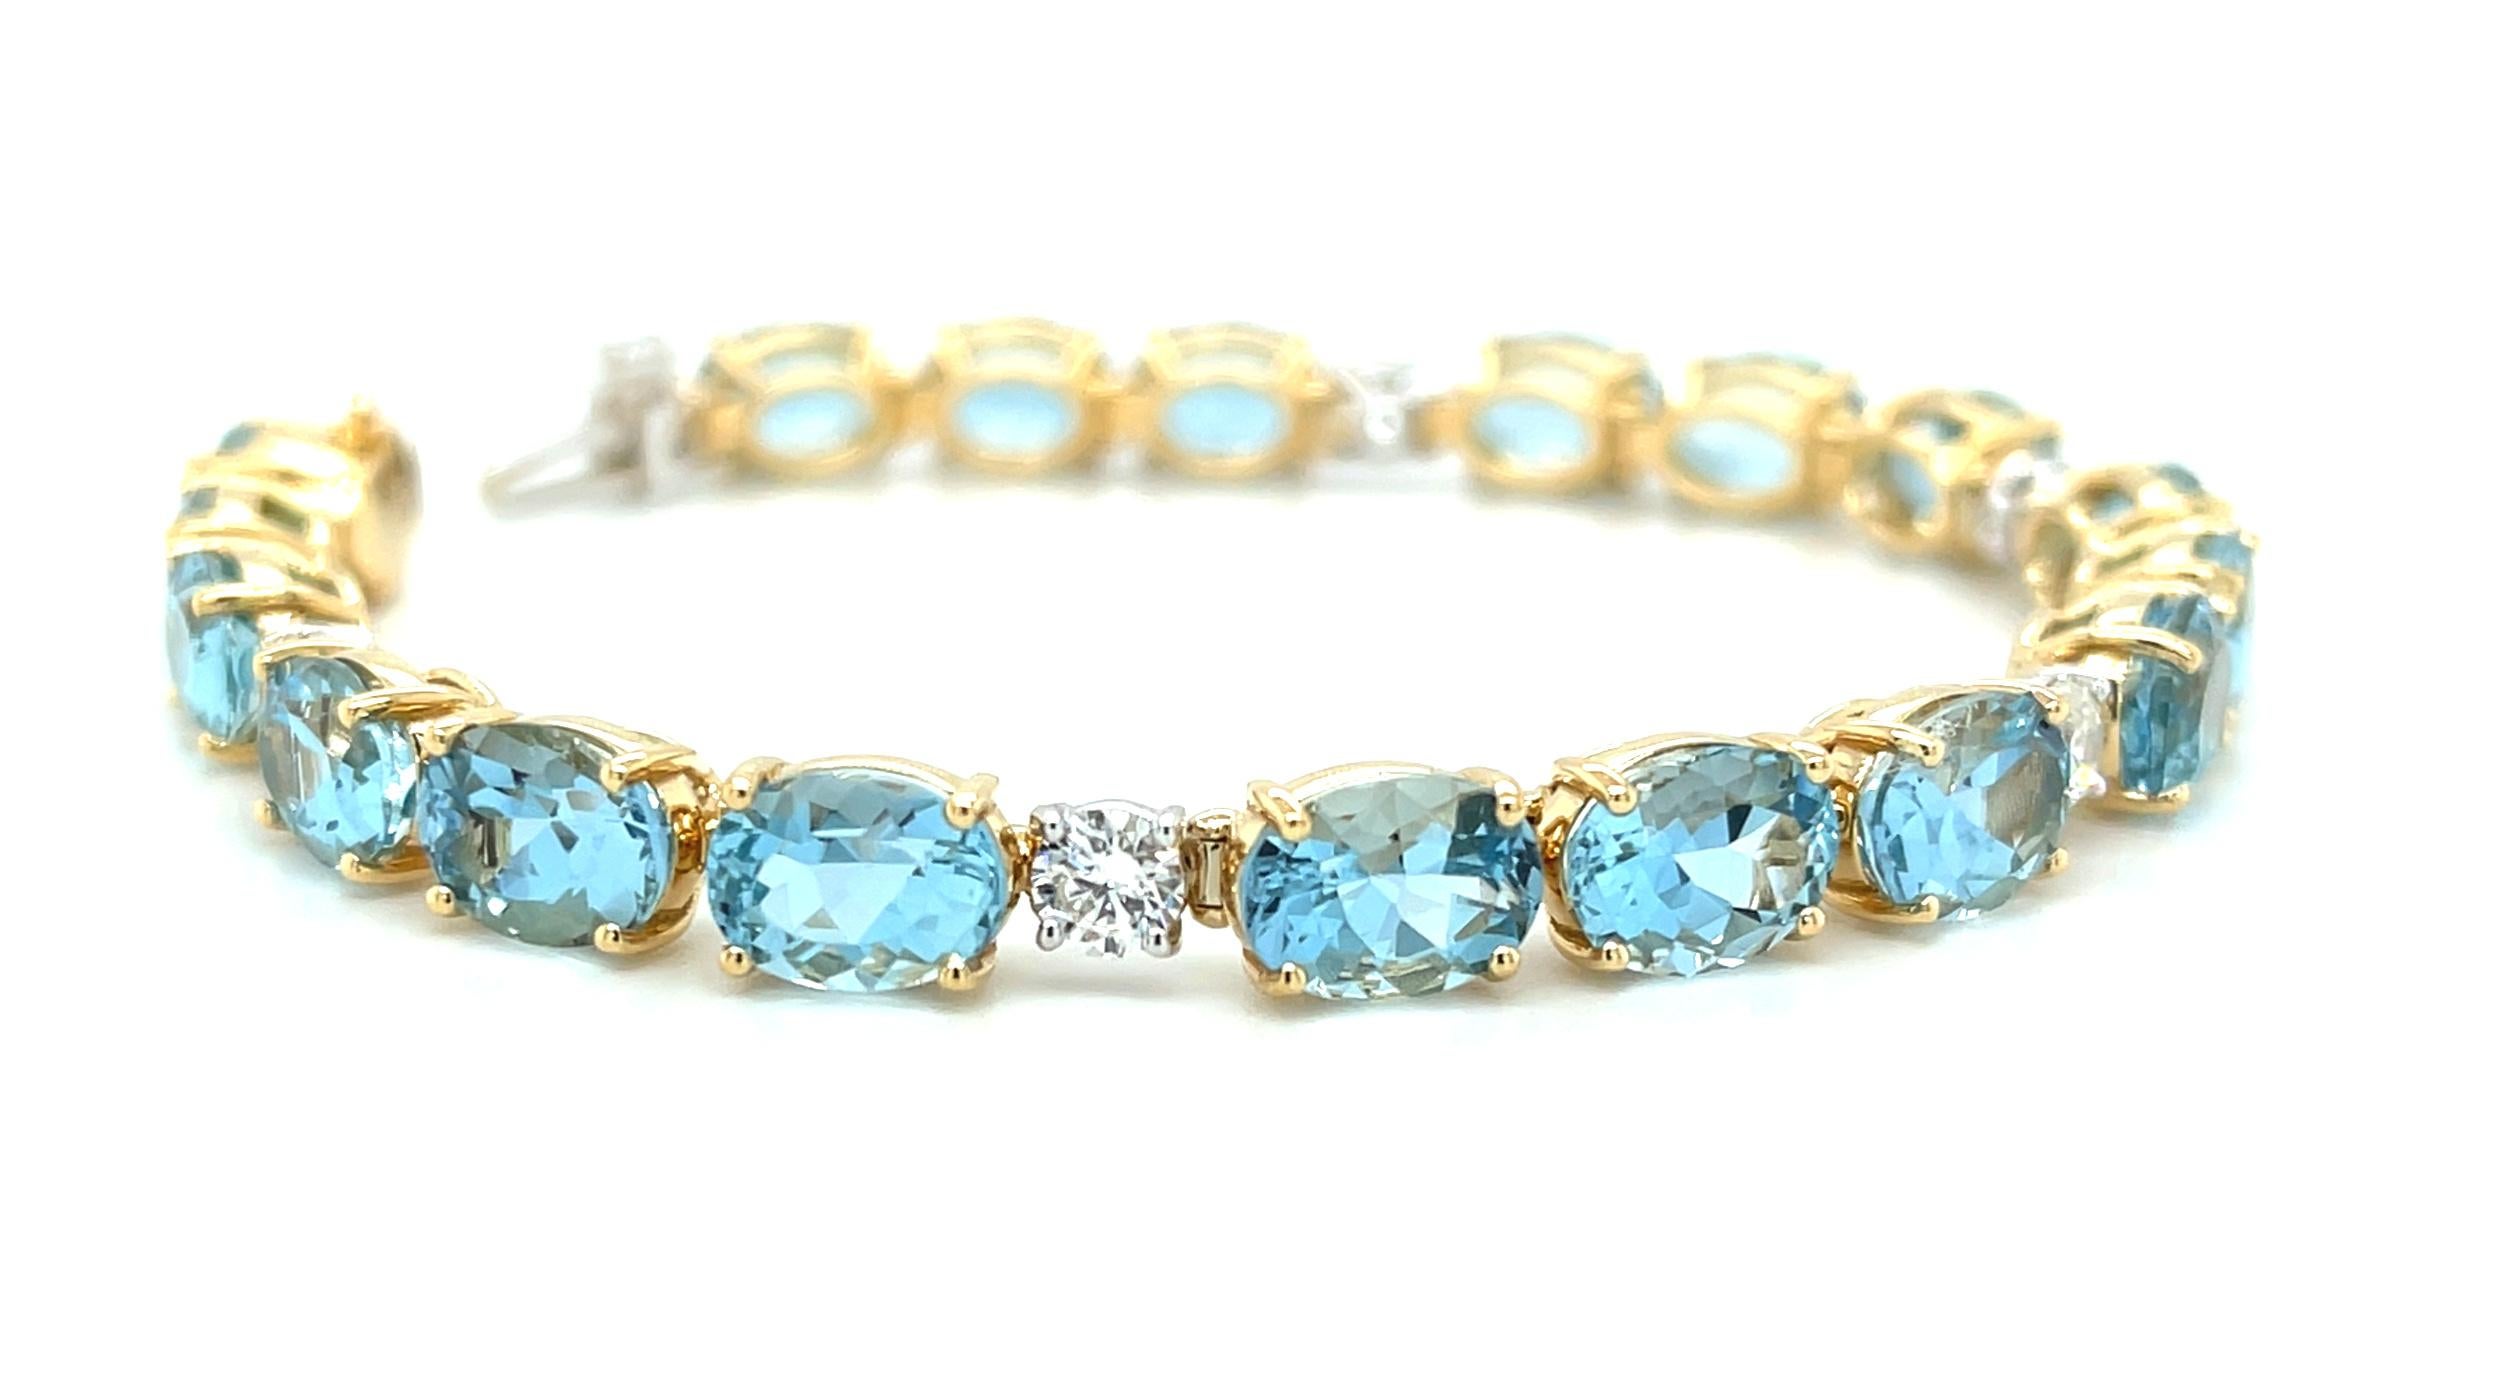 Artisan Aquamarine and Diamond Tennis Bracelet in 18k Gold, 20.99 Carats Total For Sale